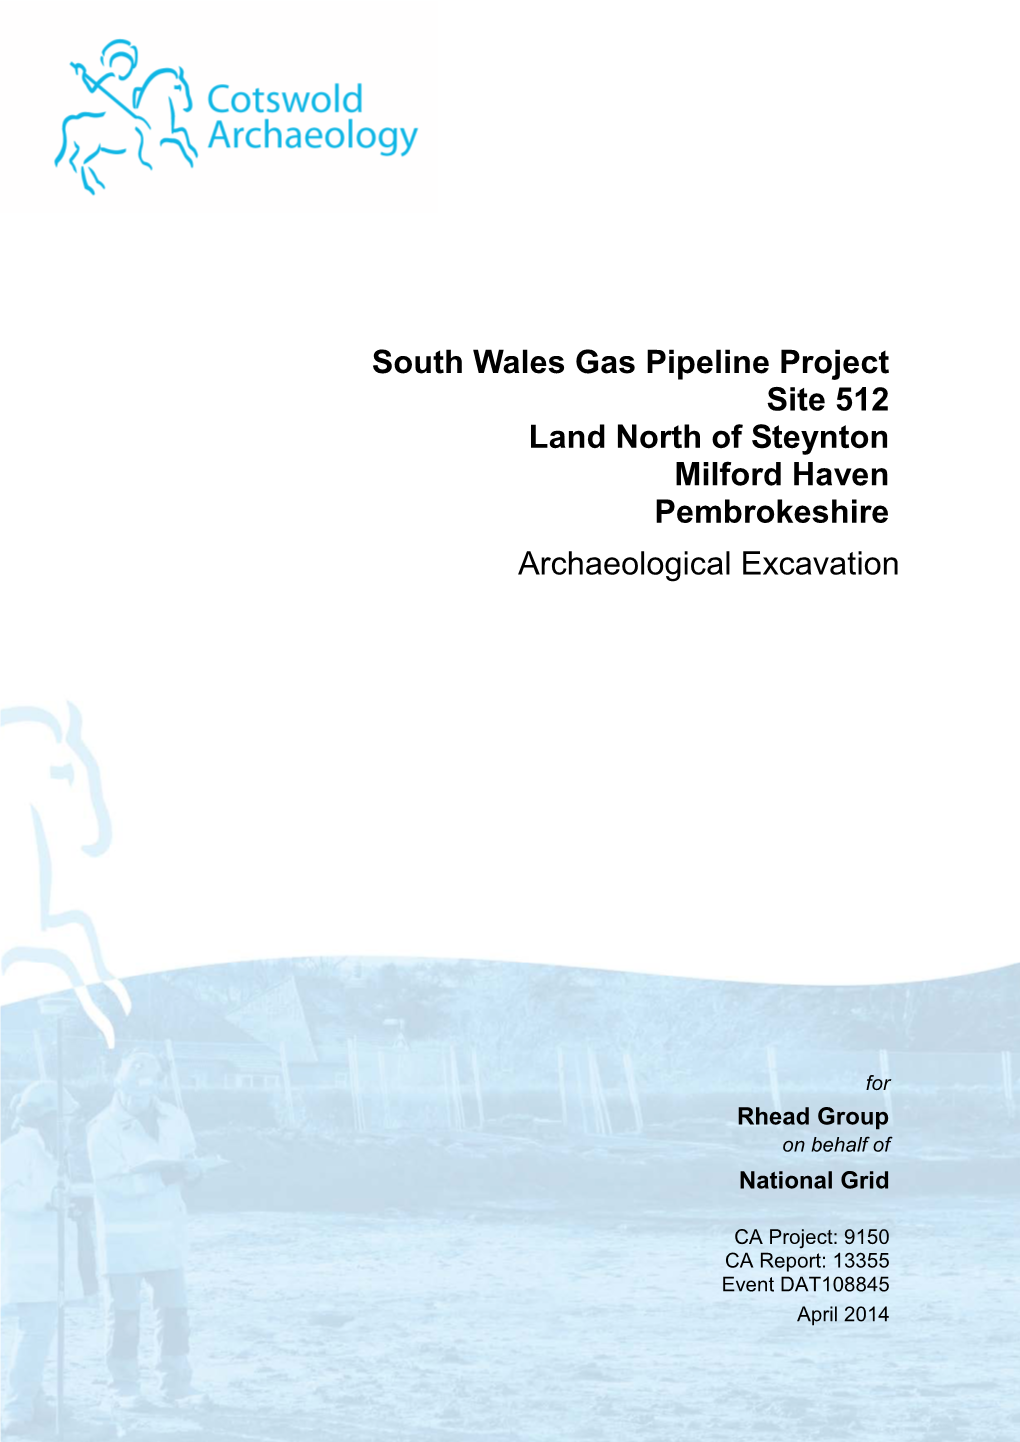 South Wales Gas Pipeline Project Site 512 Land North of Steynton Milford Haven Pembrokeshire Archaeological Excavation